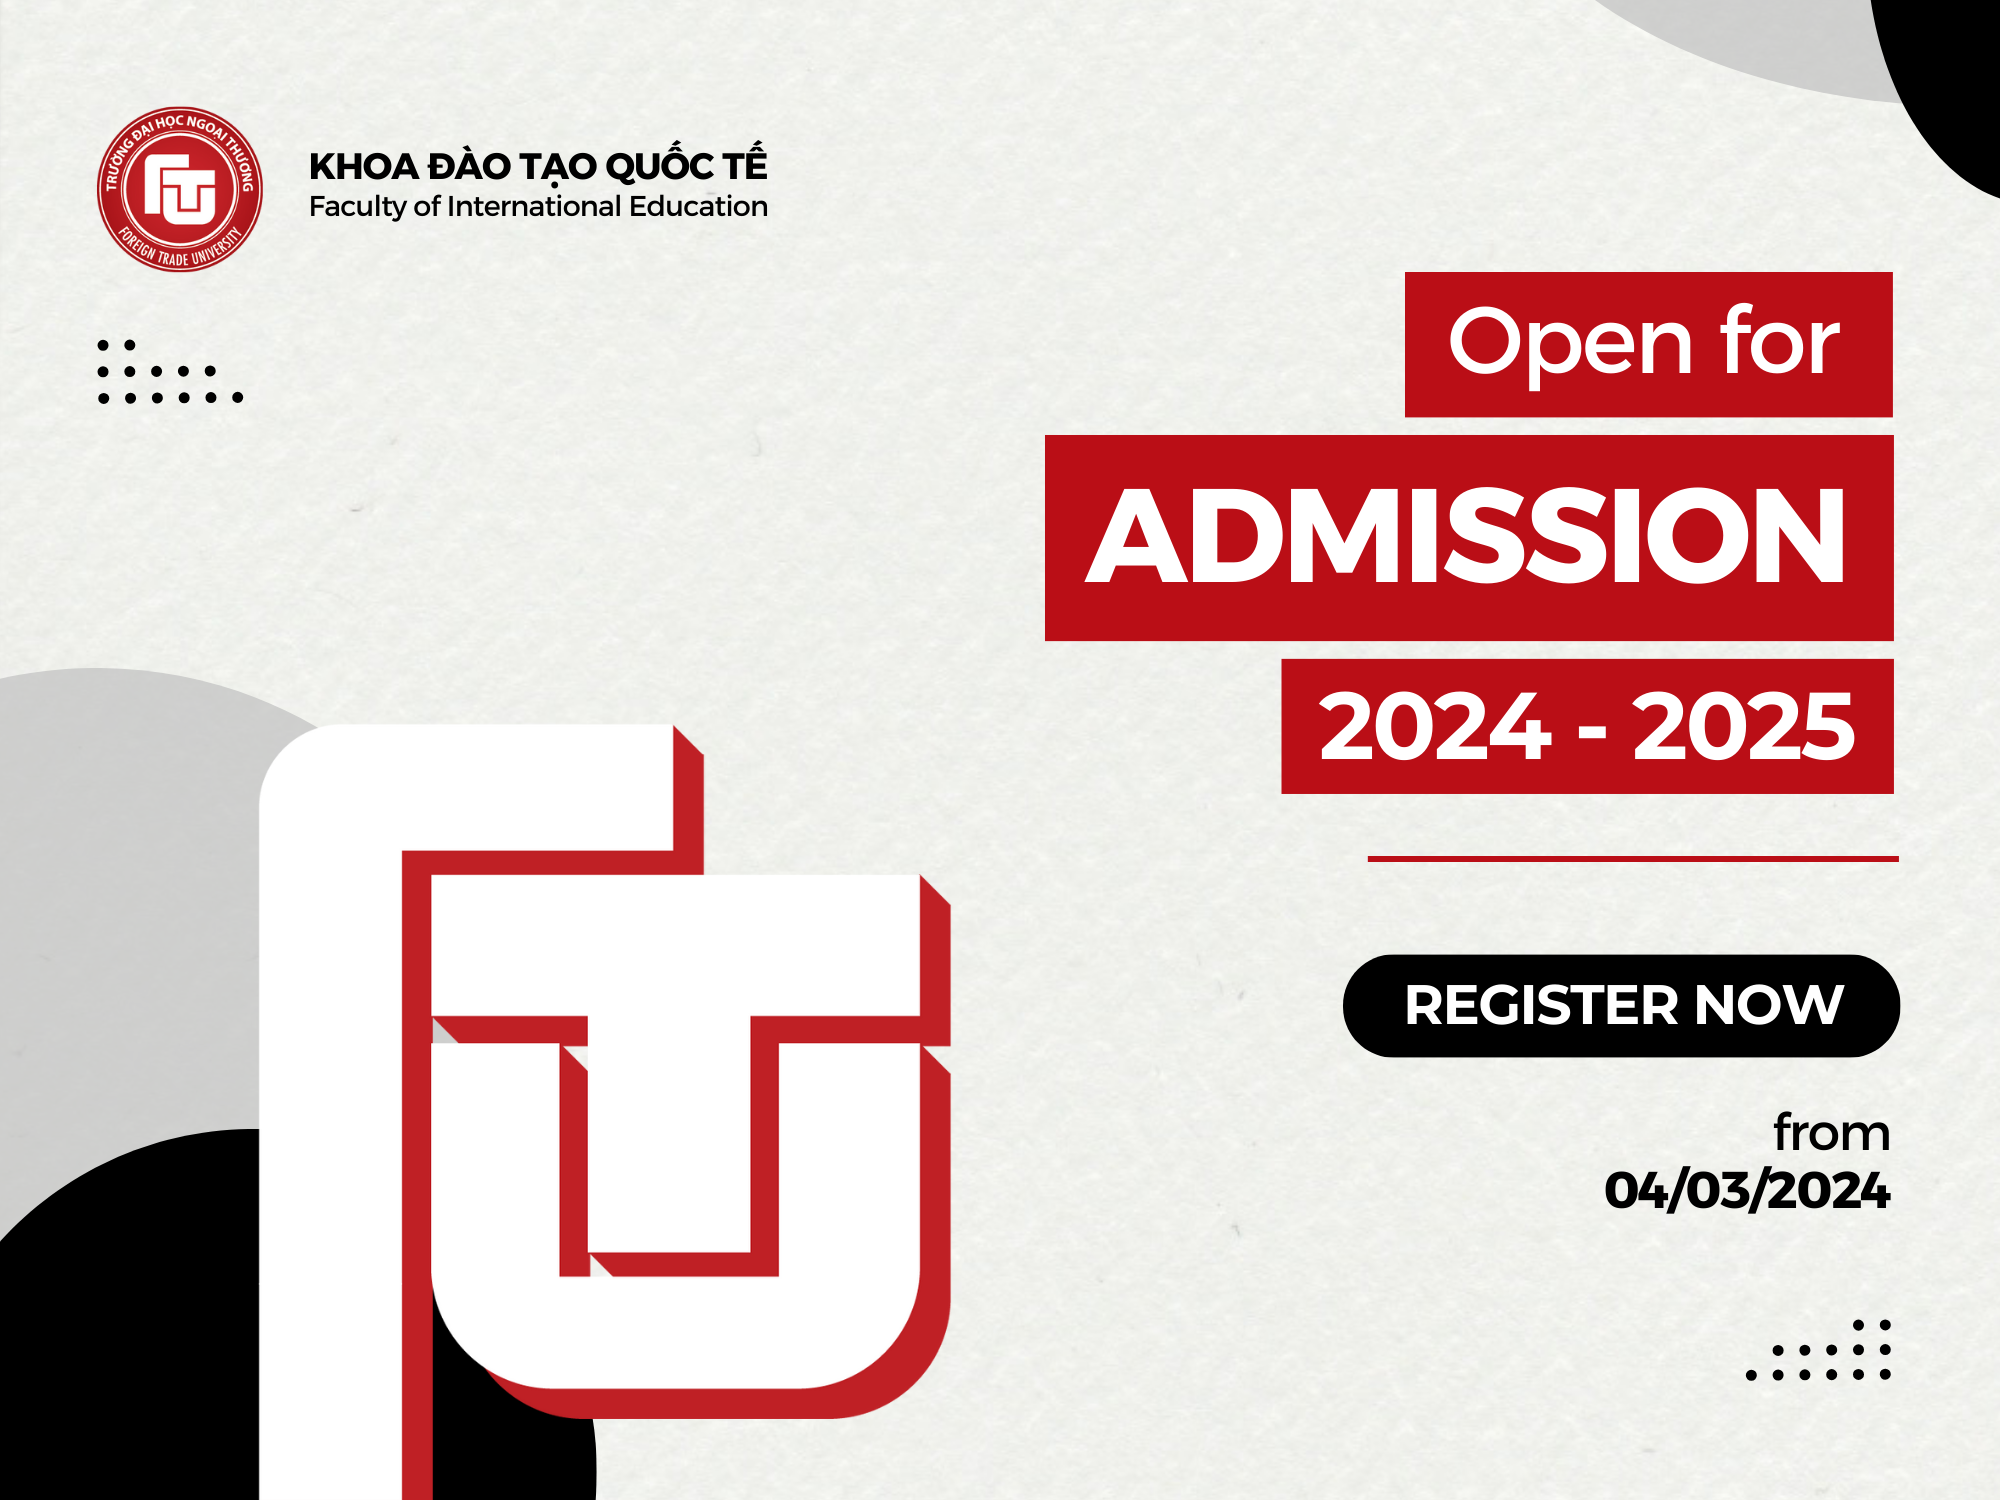 CALL FOR ADMISSION OF THE FACULTY OF INTERNATIONAL EDUCATION